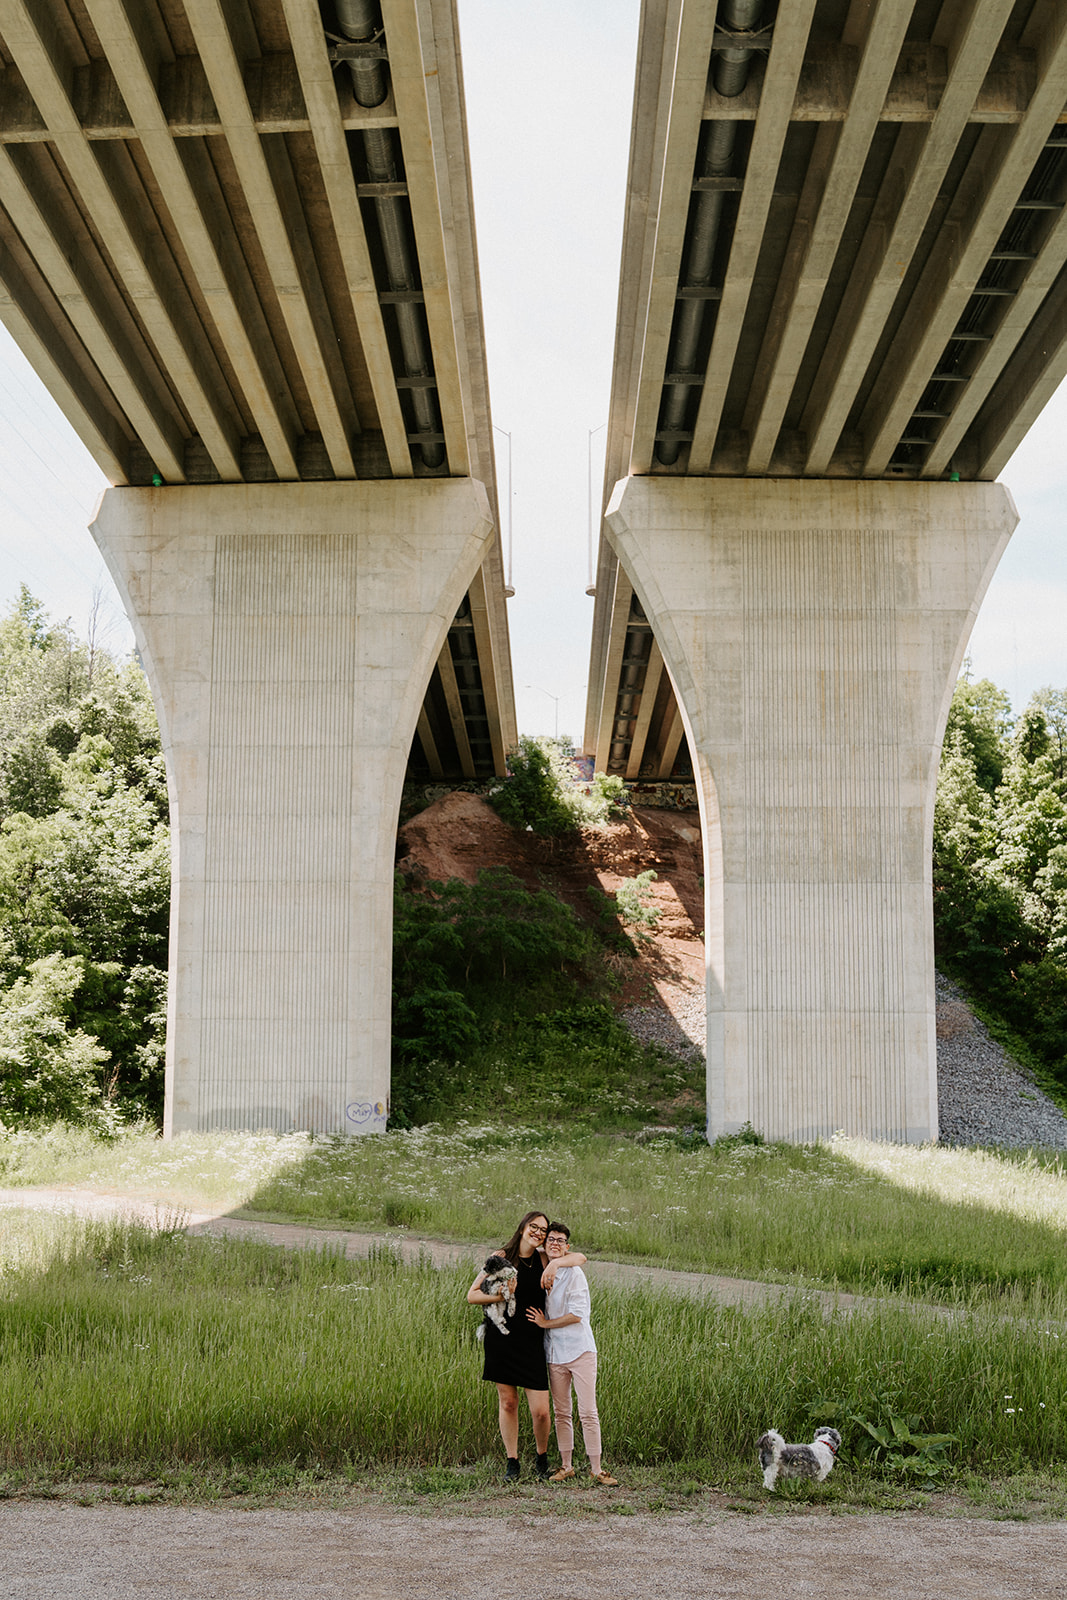 Two people standing underneath an overpass.  One person wrapping their arm around the other.